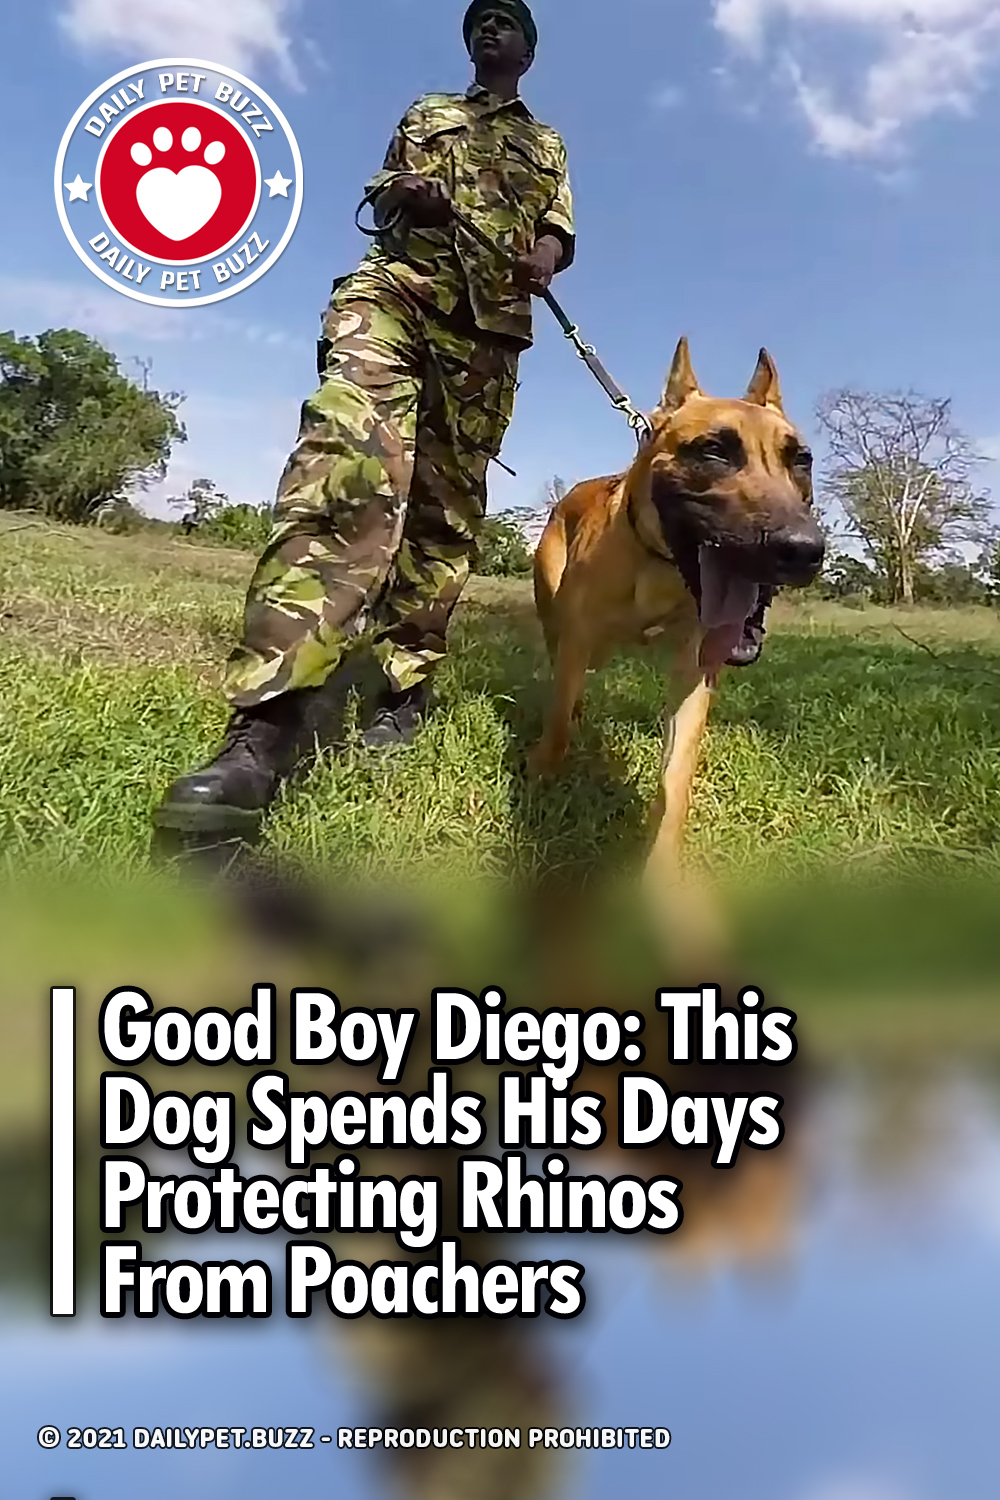 Good Boy Diego: This Dog Spends His Days Protecting Rhinos From Poachers